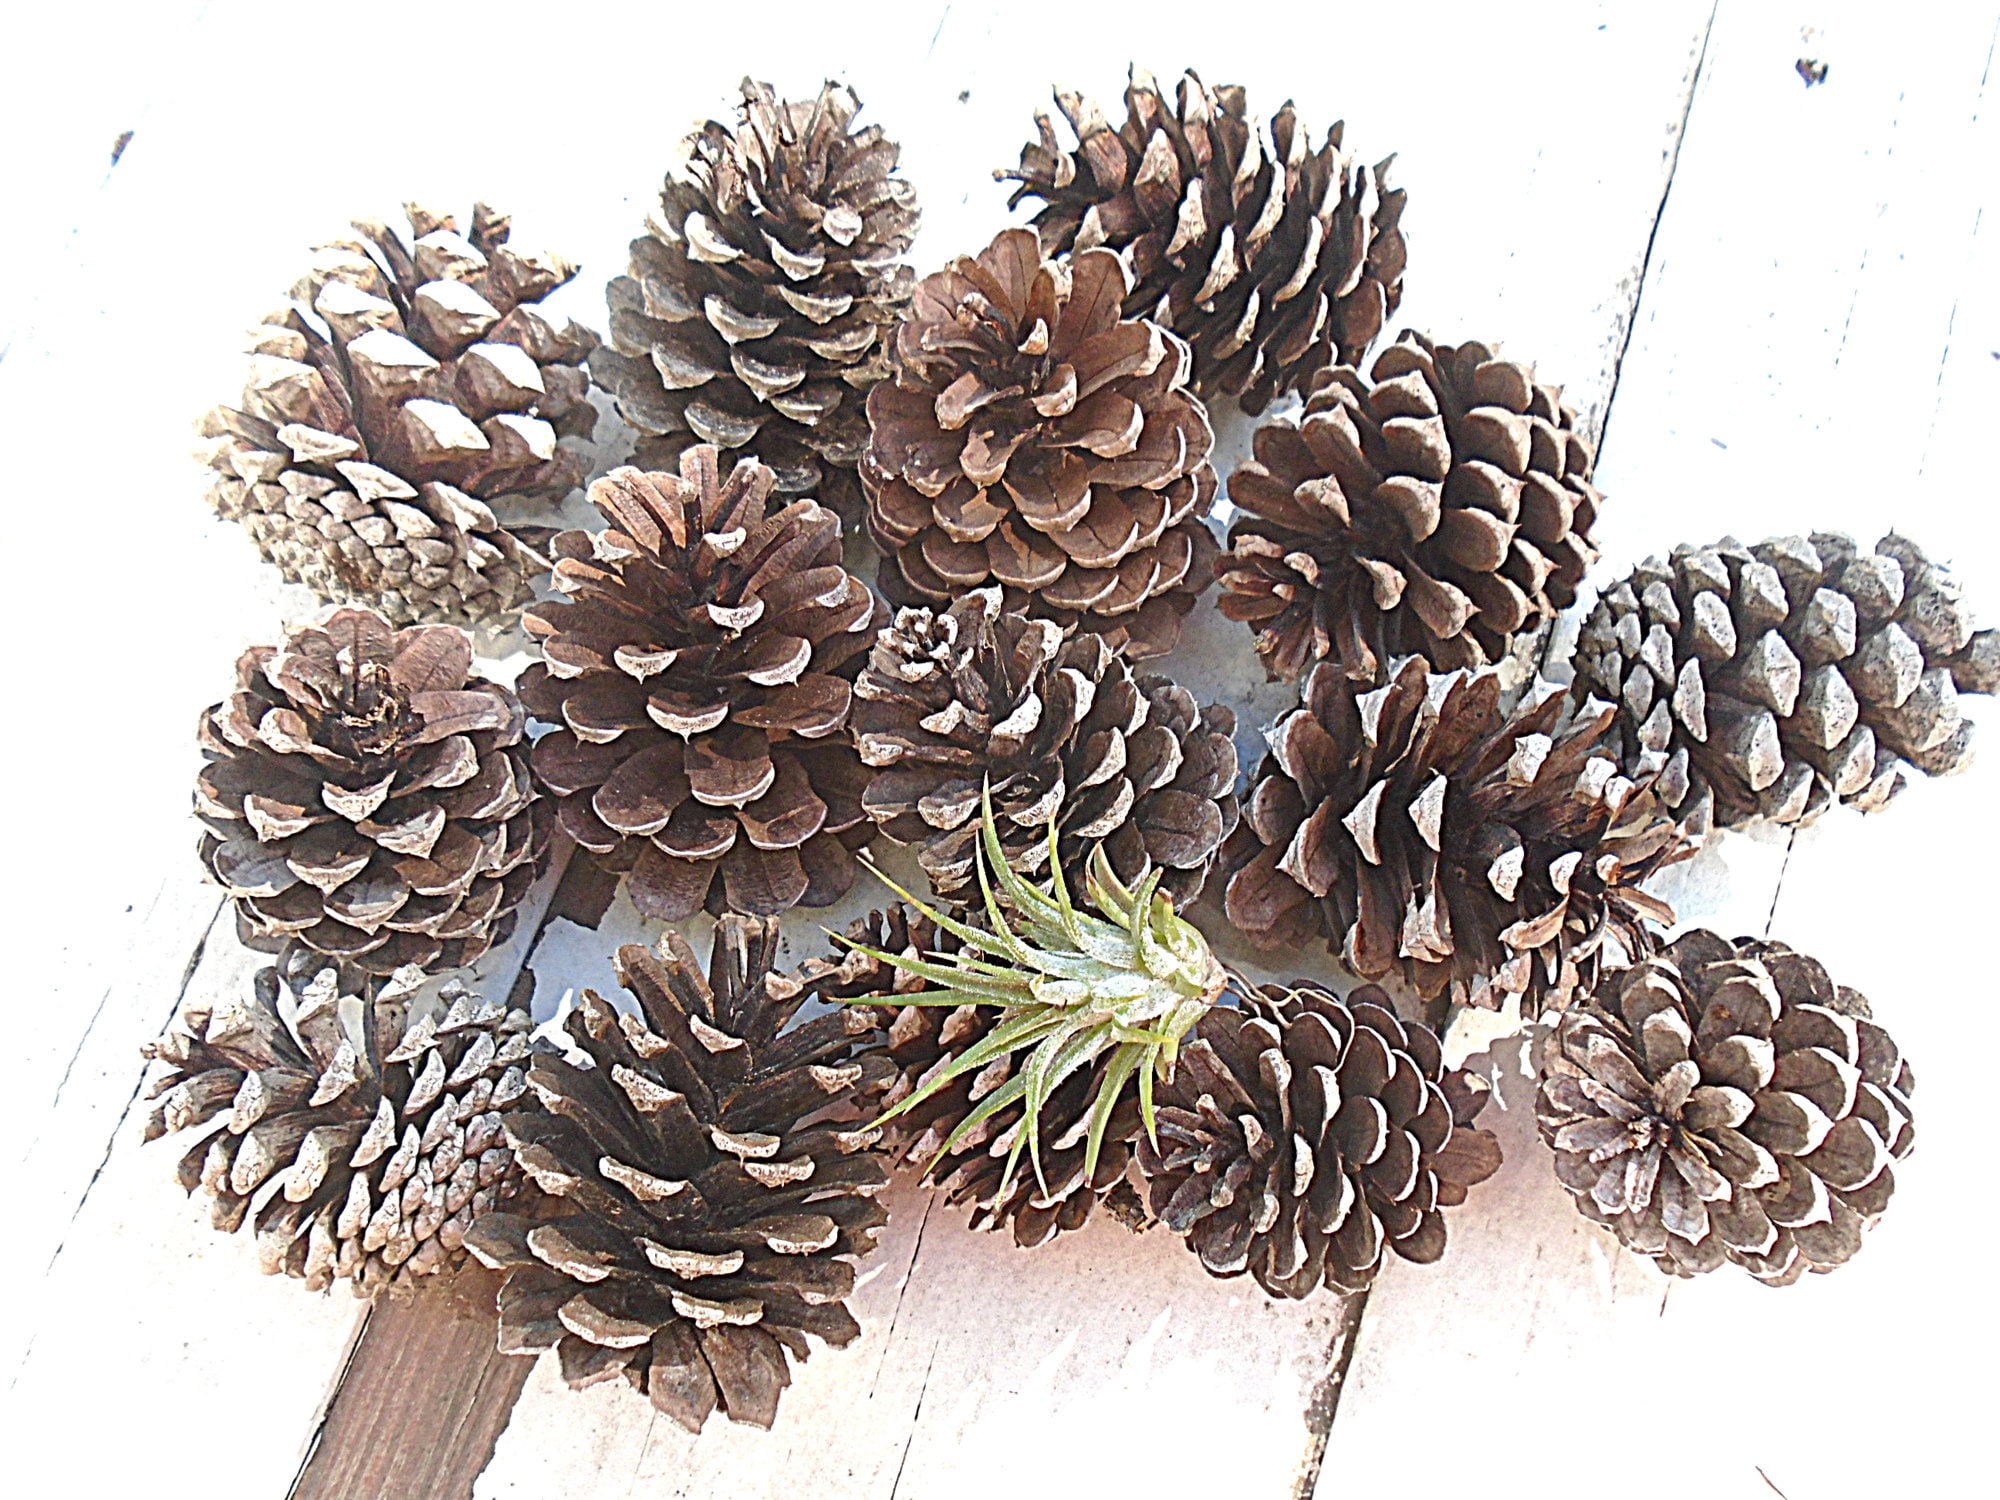 Small to Medium 15 Pine Cones 2-3 Inch Natural for Autumn Crafting Pinecone  Holiday Home Decor 